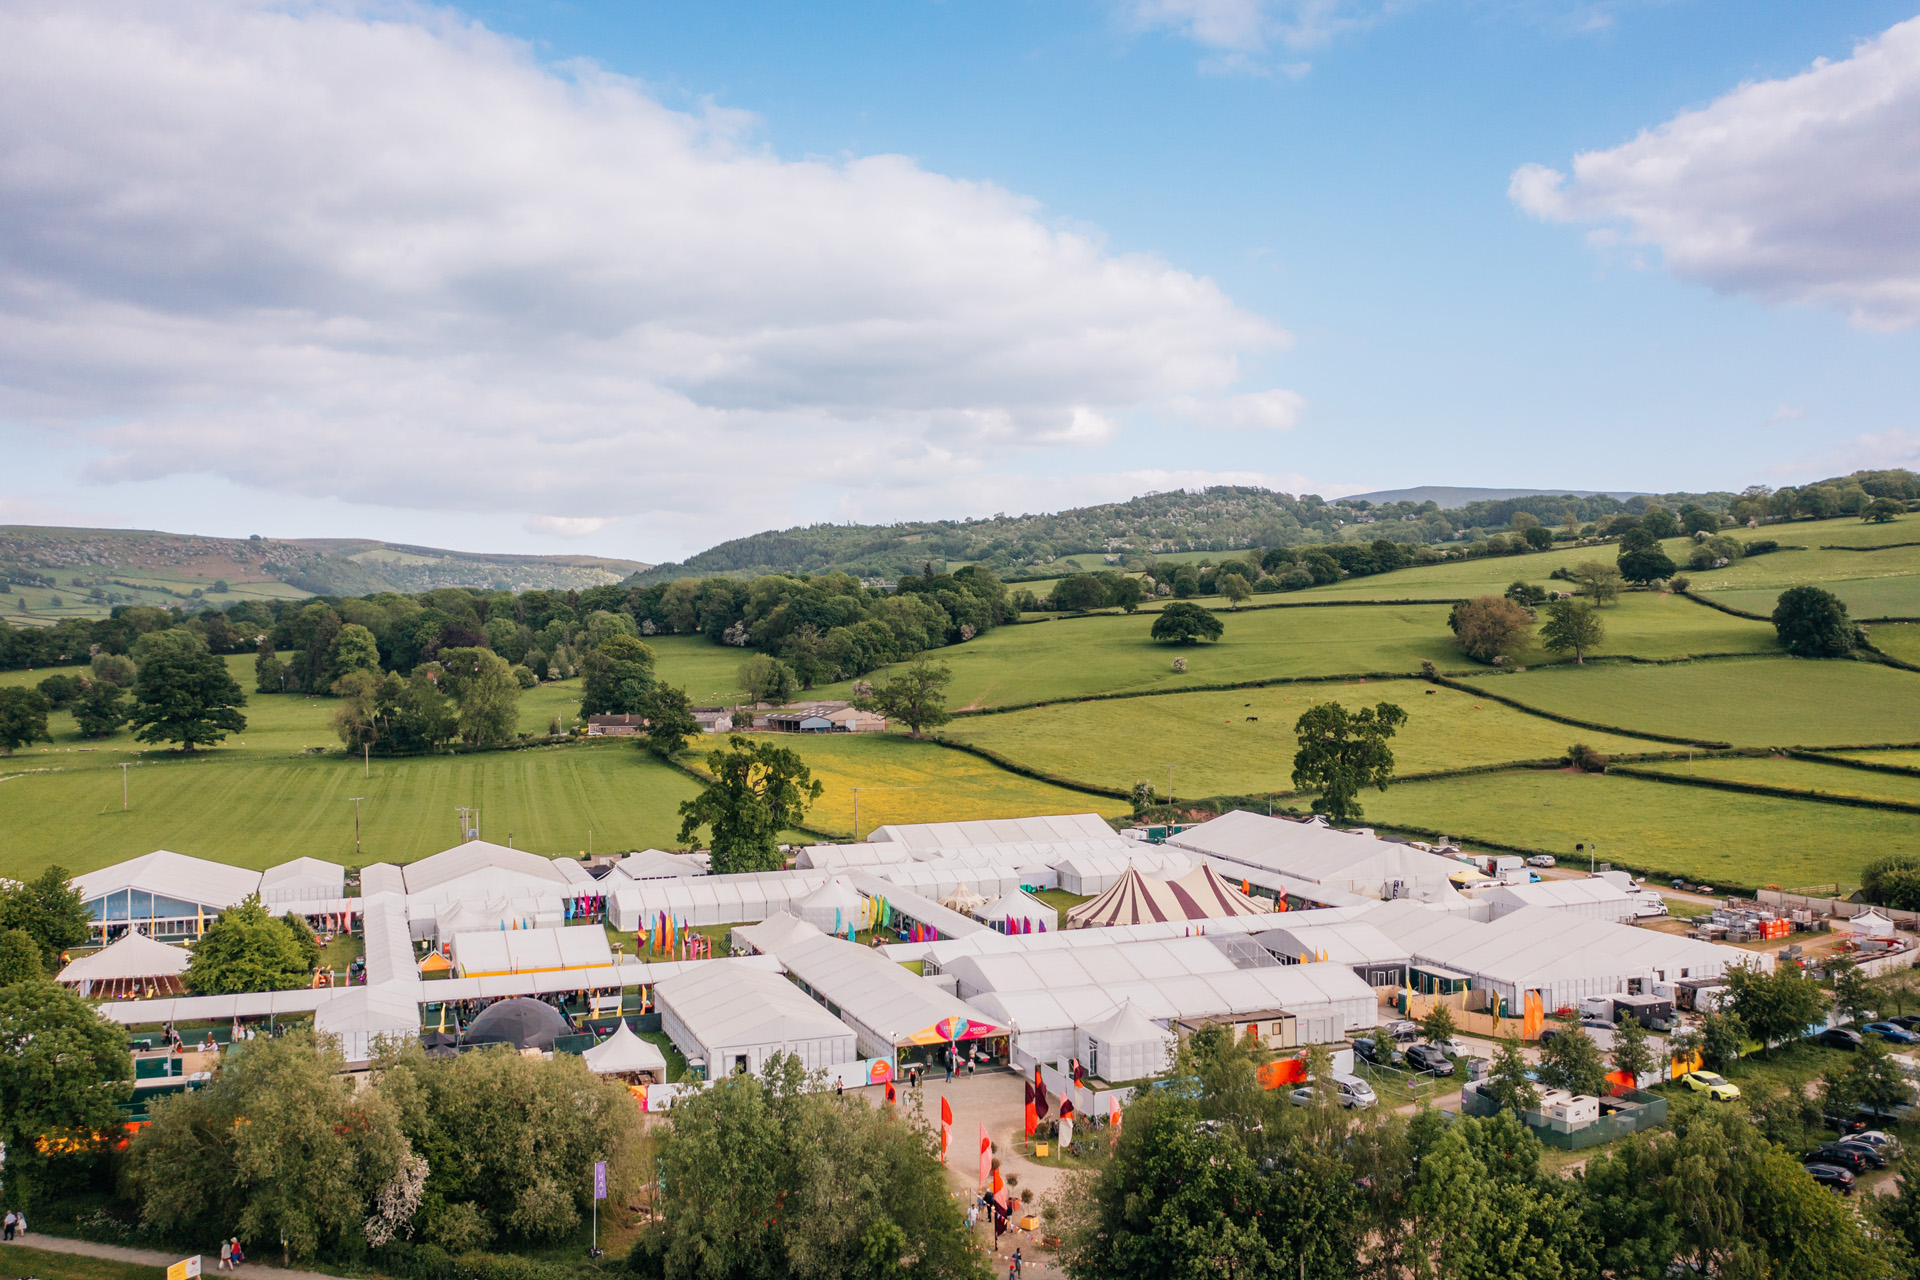 The Hay Festival site